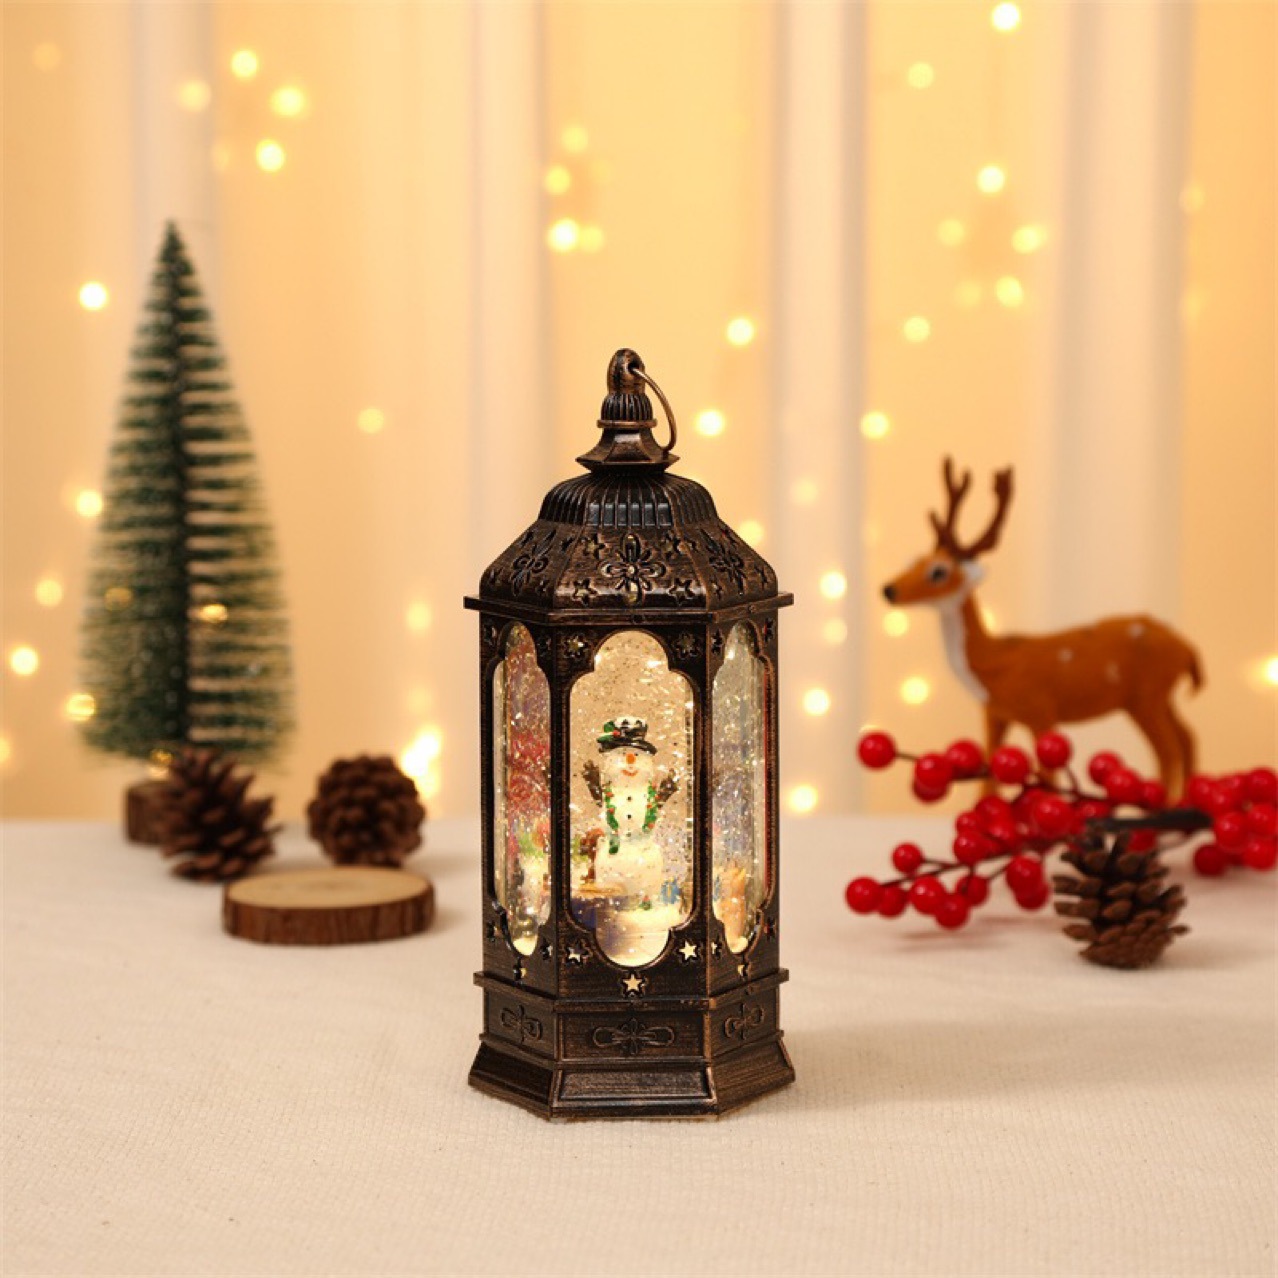 New Creative Christmas Children's Gift with Concert Rotating Resin Elderly Water Injection Oil Lamp Furnishings Ornaments